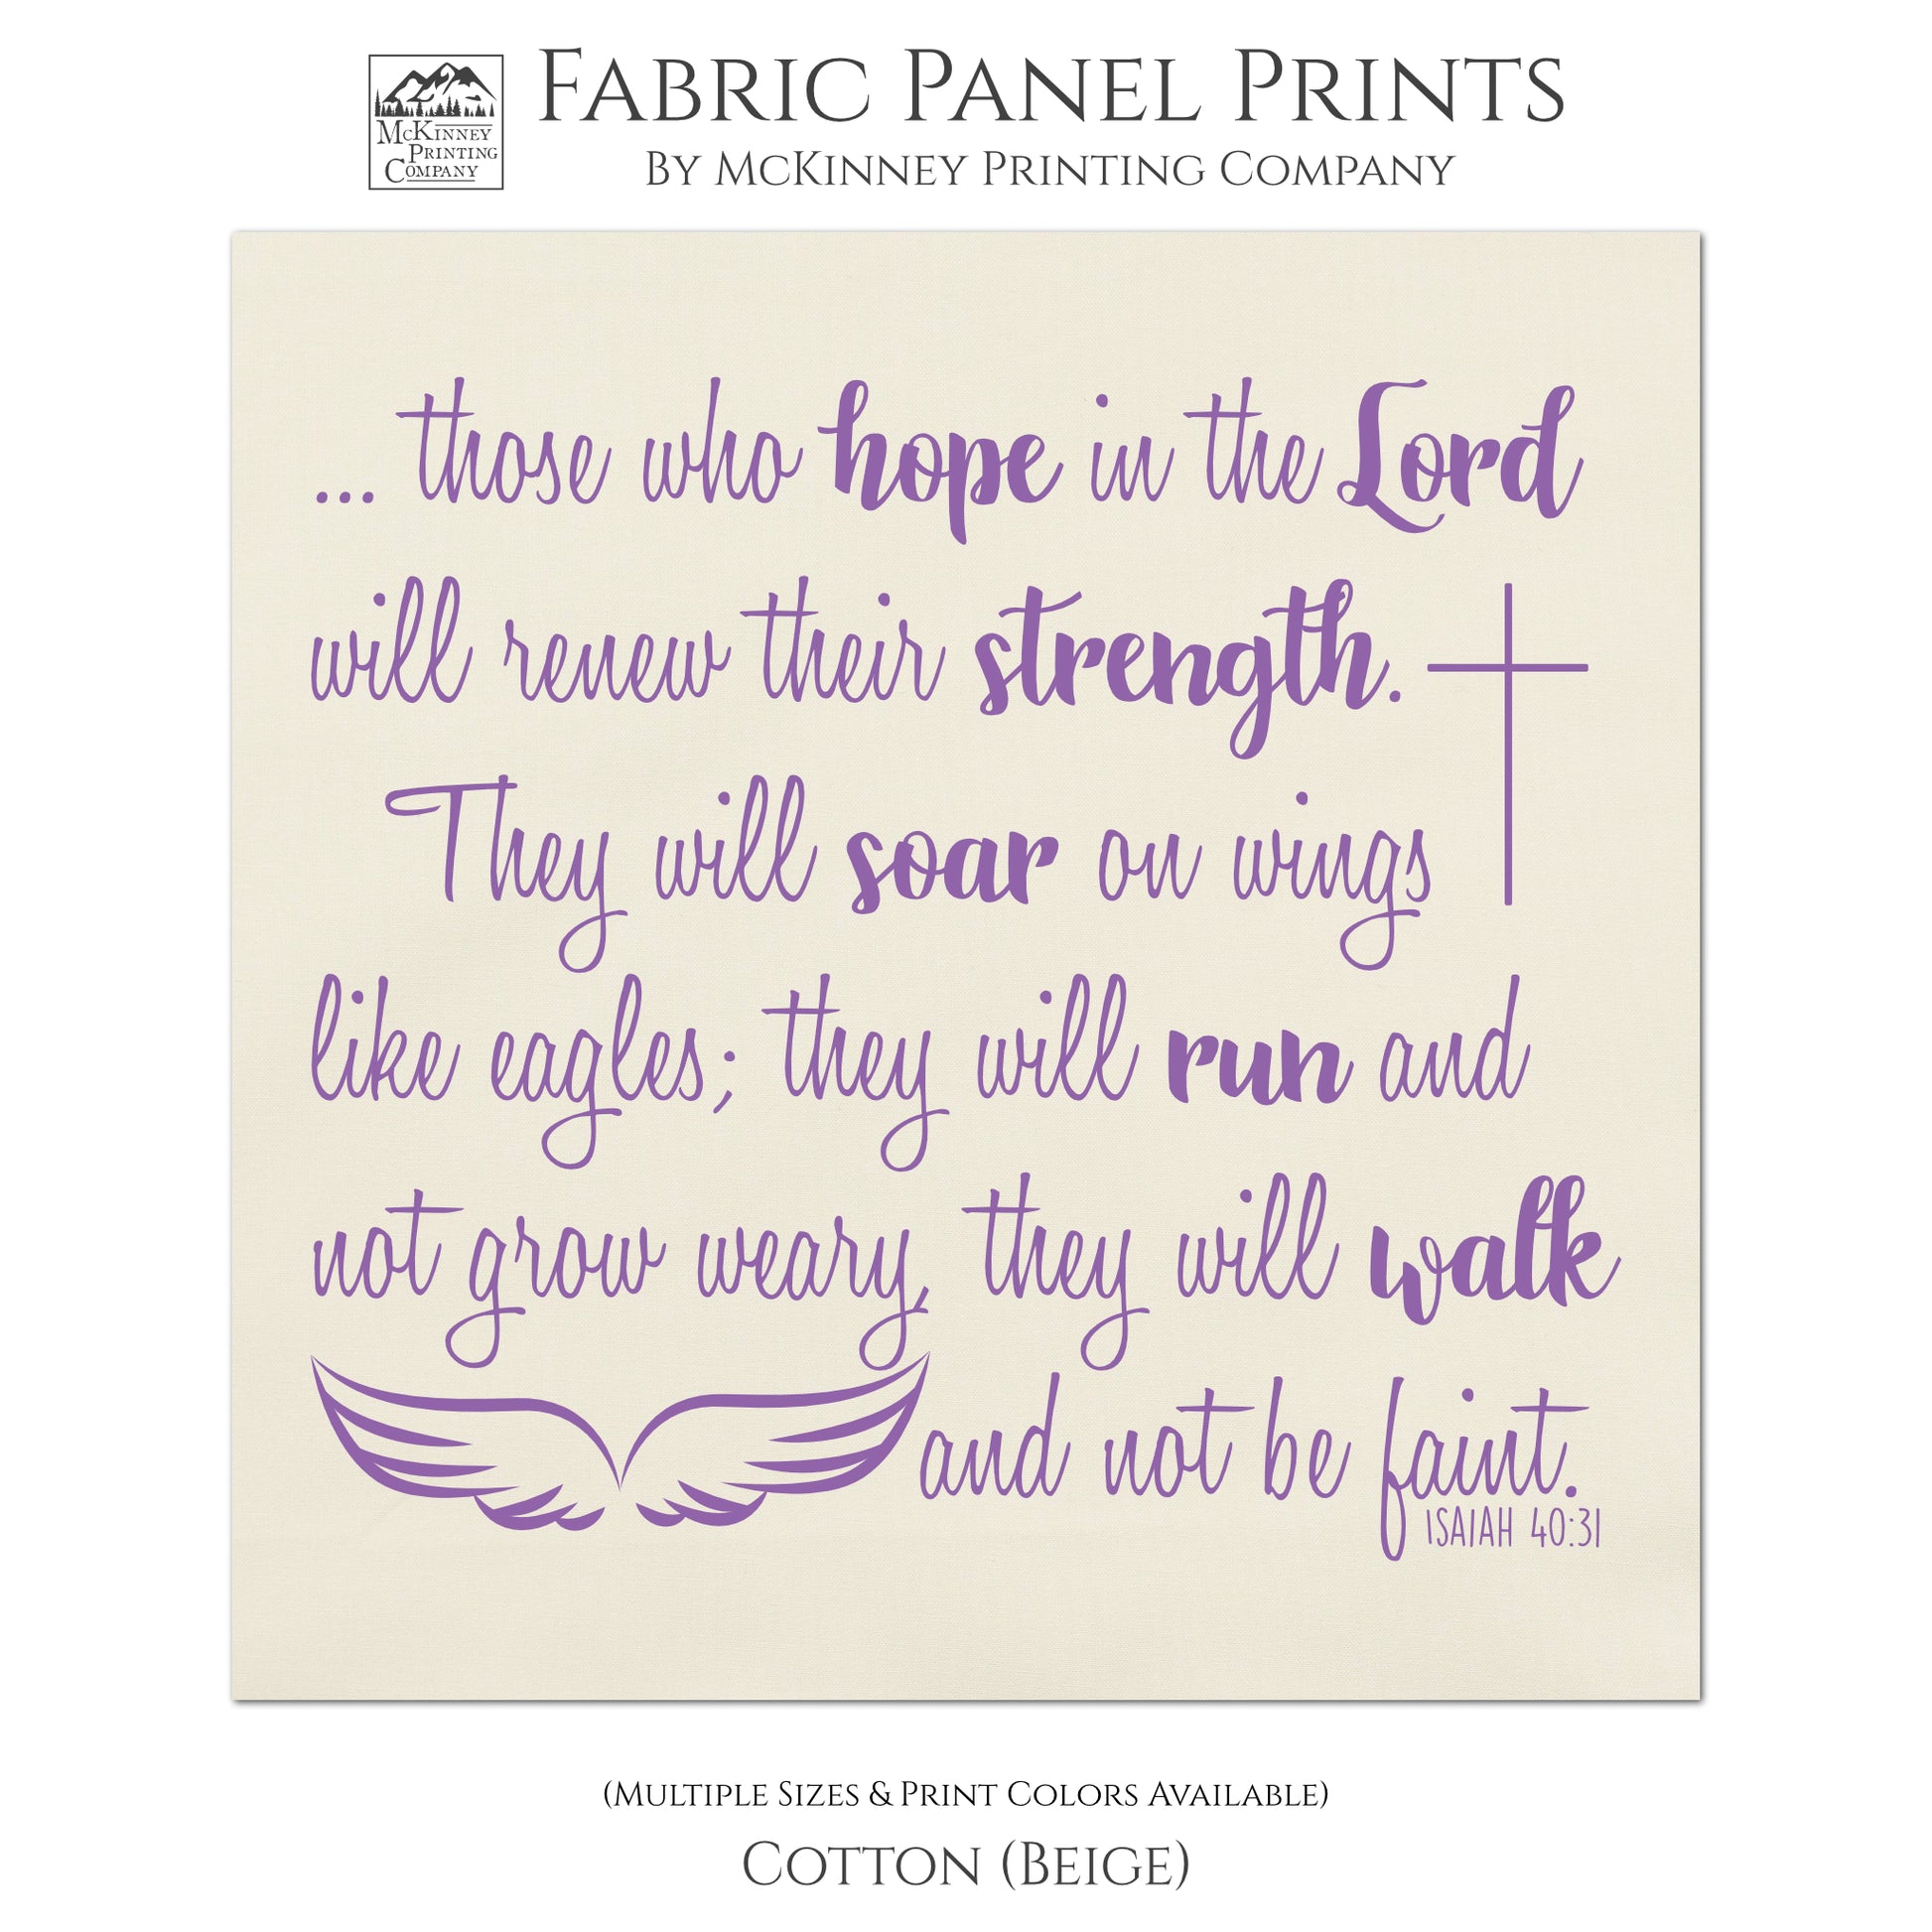 Isaiah 40:31 - Those who hope in the Lord will renew their strength.  They will soar on wings like eagles; they will run and not grow weary, they will walk and not be faint.  - Fabric Panel Print for Quilts  - Cotton